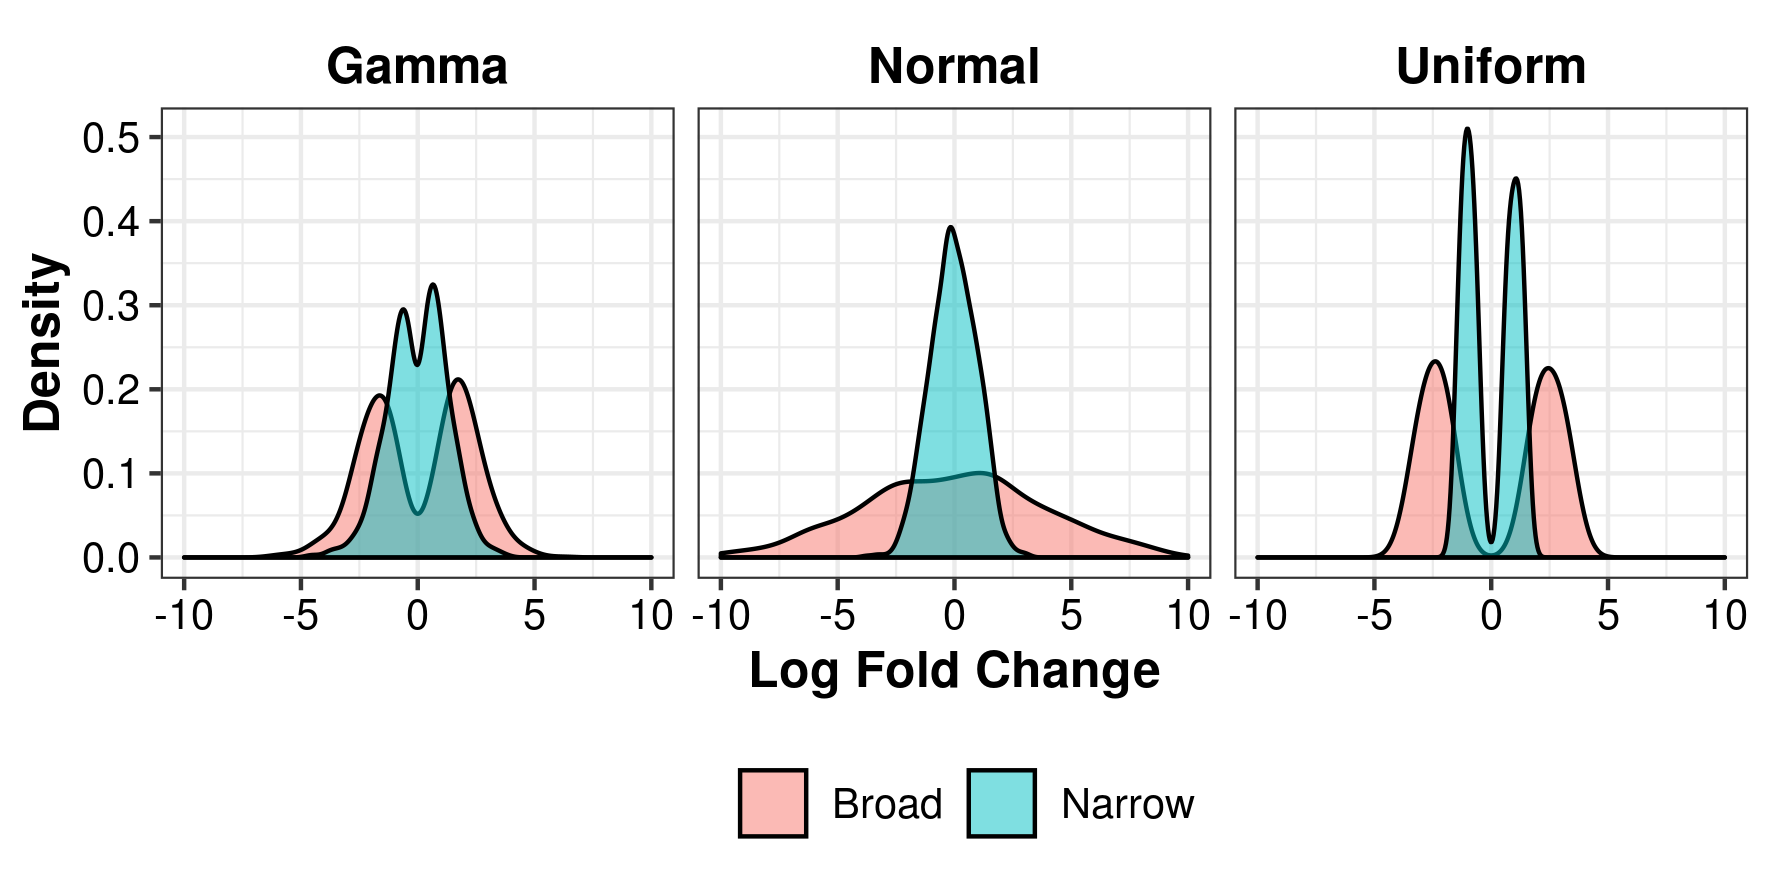 Examples of Log Fold Changes following a gamma, normal and uniform distribution.